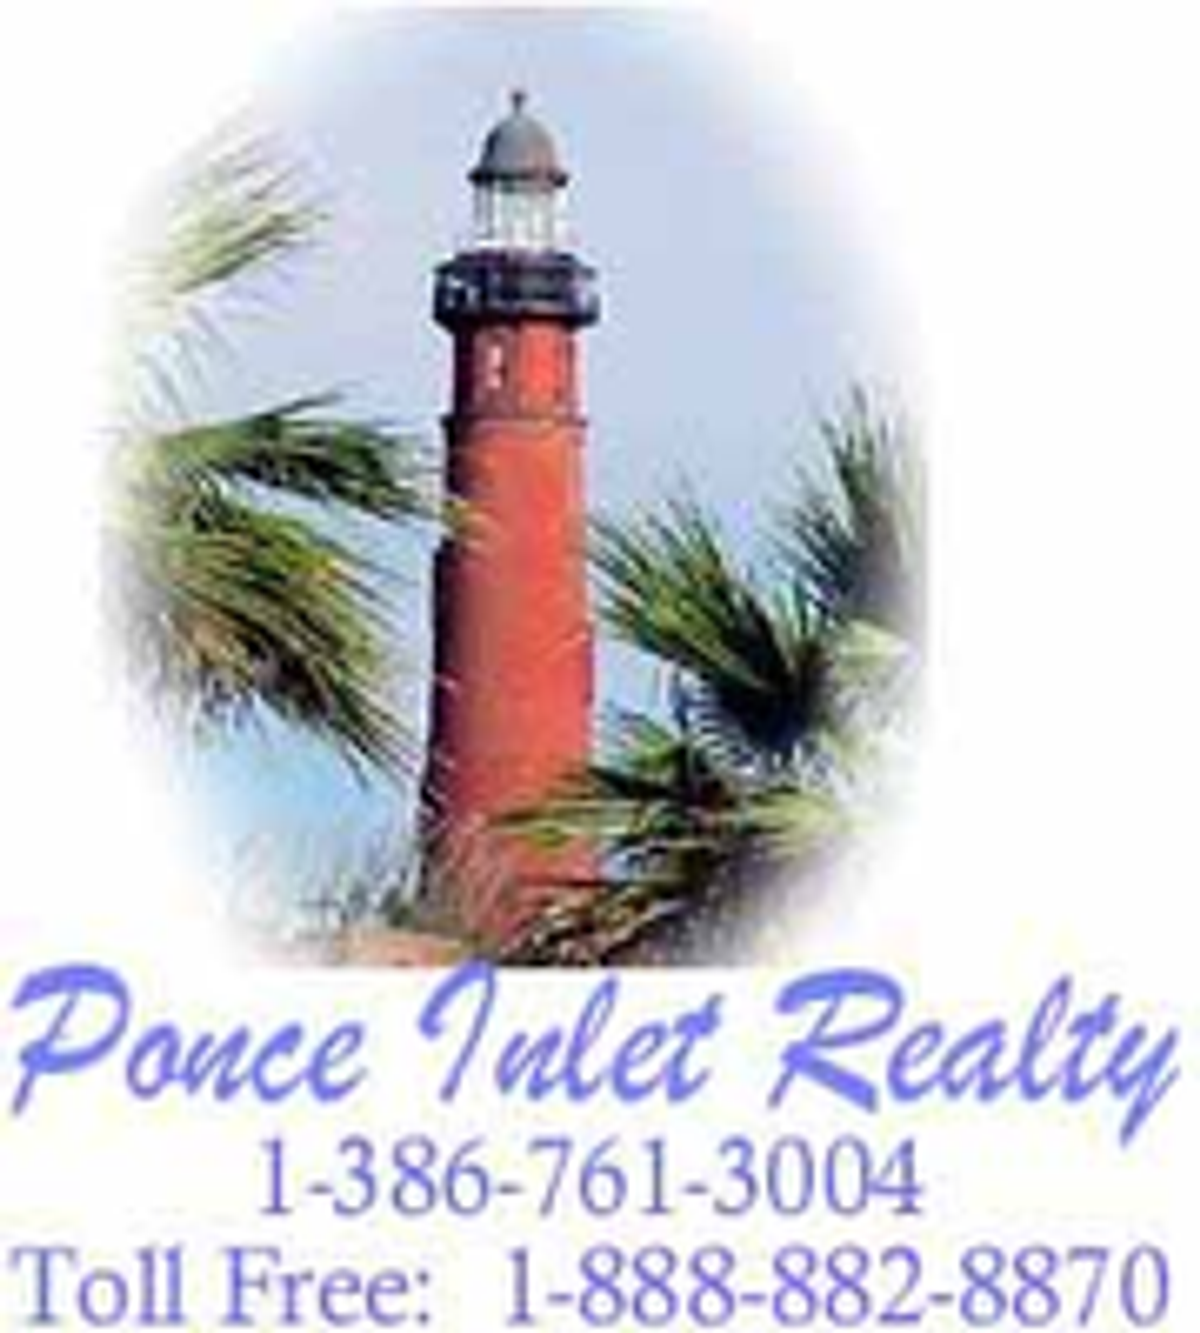 Photo for Lynette Swinski, Listing Agent at Ponce Inlet Realty, Inc